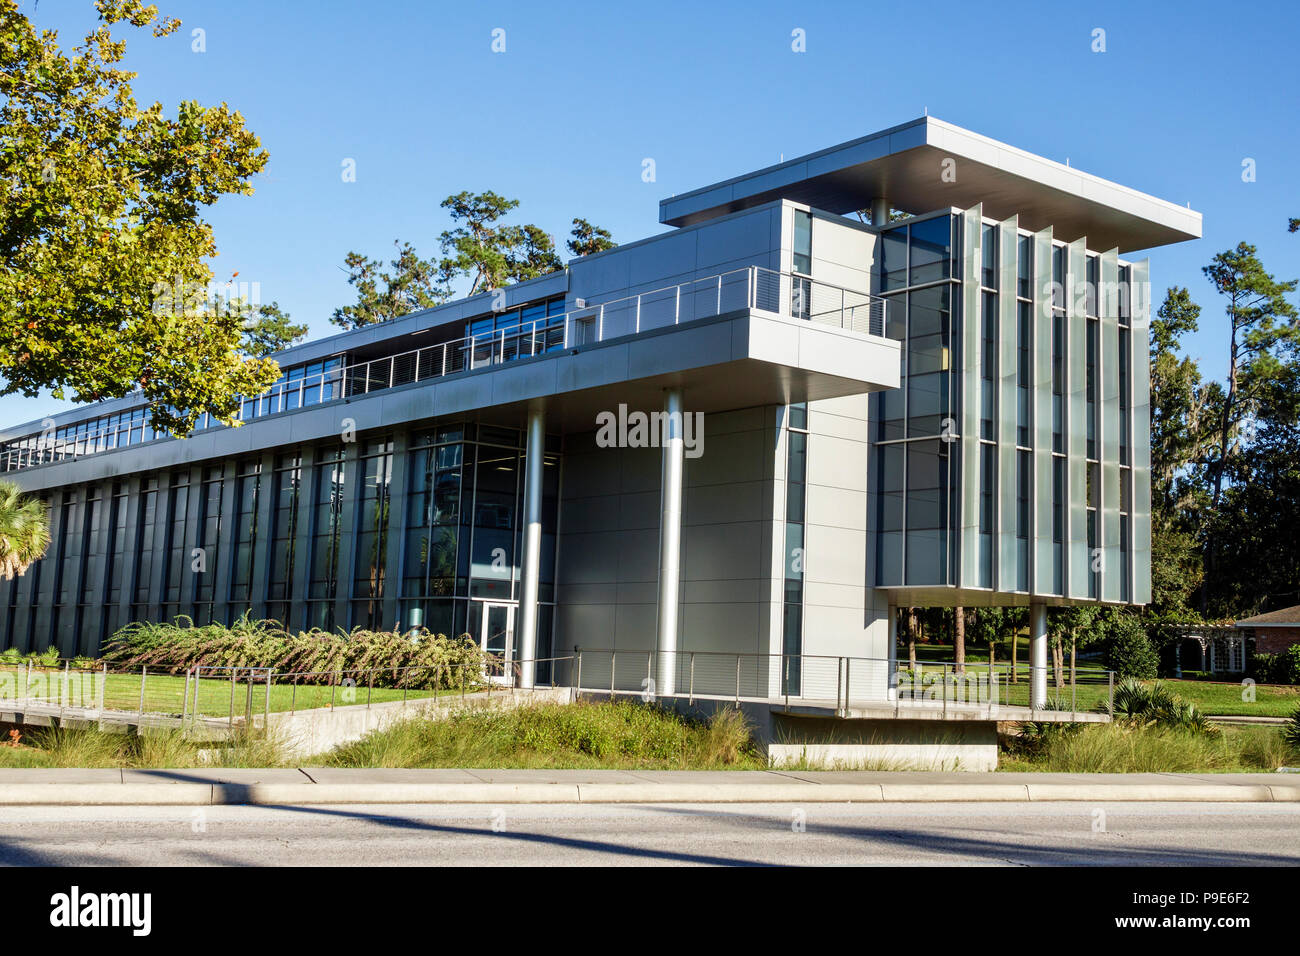 Gainesville Florida,Mowry Road,University of Florida,campus,Clinical & Translational Science Institute,biomedical research facility,building,exterior, Stock Photo